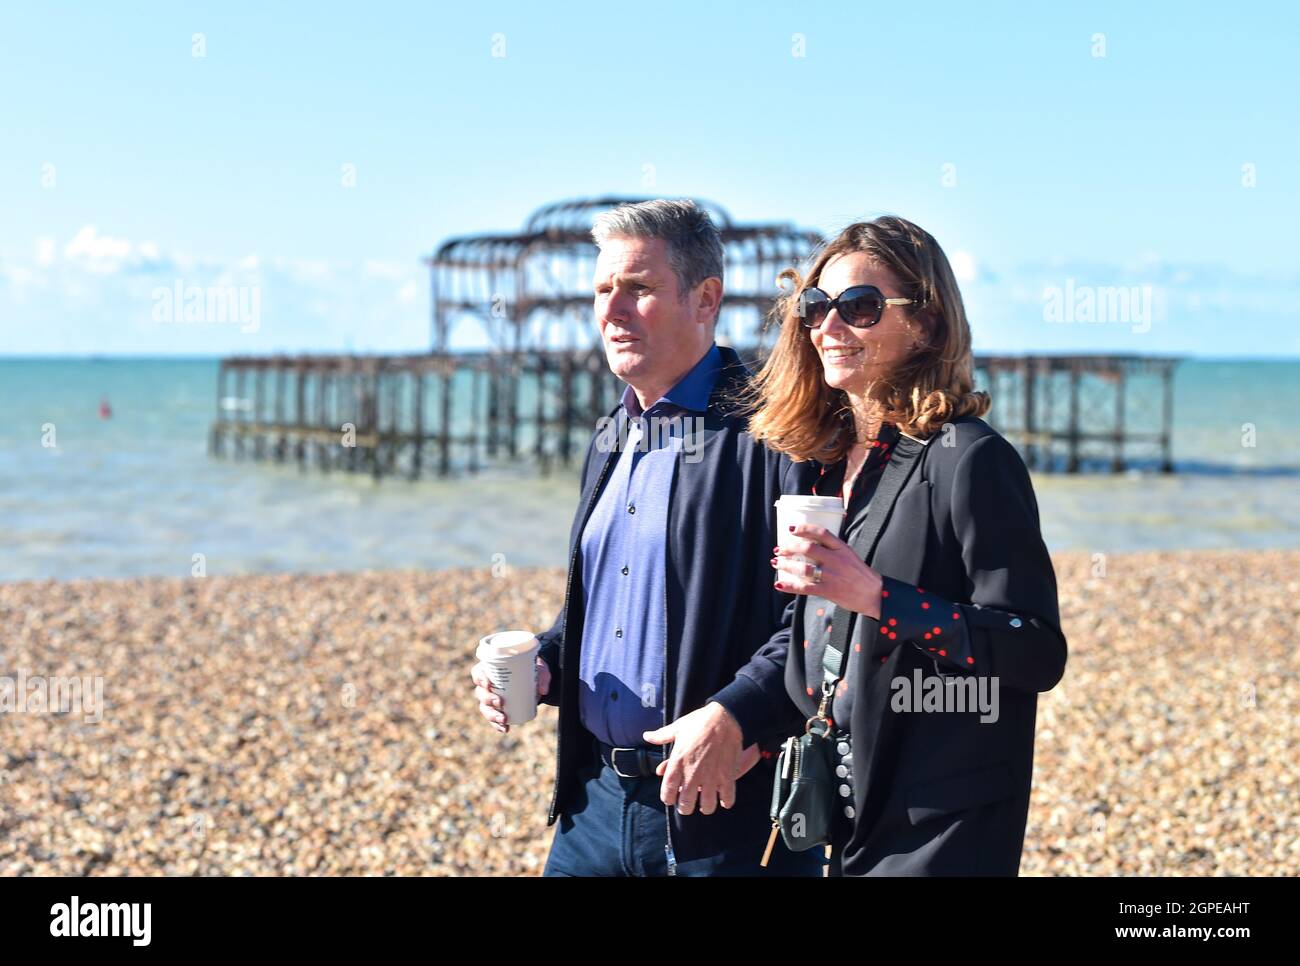 Brighton, UK. 29th Sep, 2021. Sir Keir Starmer the leader of the Labour Party walks along Brighton seafront with his wife Victoria before giving his speech at the Labour Party Conference being held in the Brighton Centre : Credit Simon Dack/Alamy Live News Stock Photo